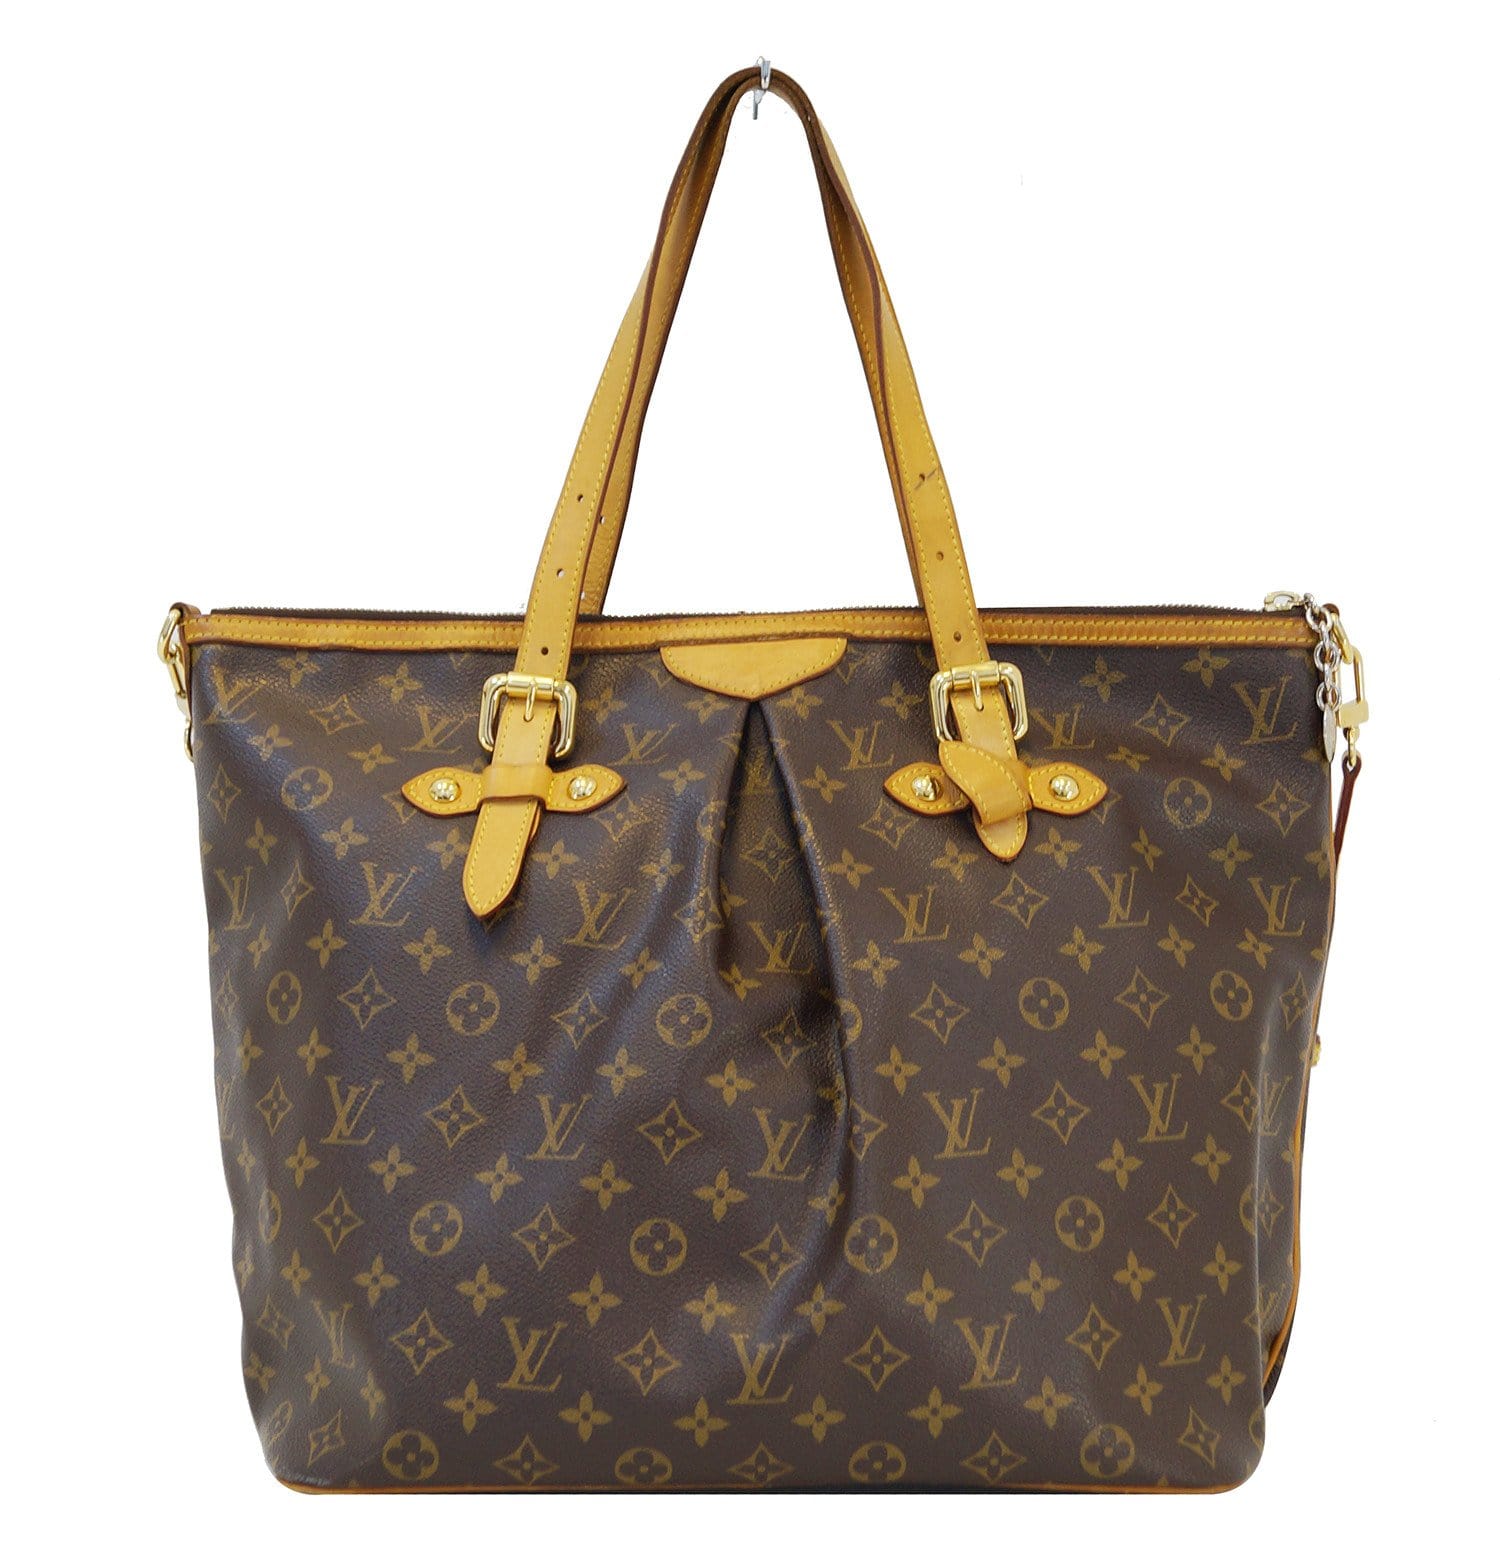 Pre-owned Authentic Louis Vuitton Palermo Tote Bag. Excellent condition